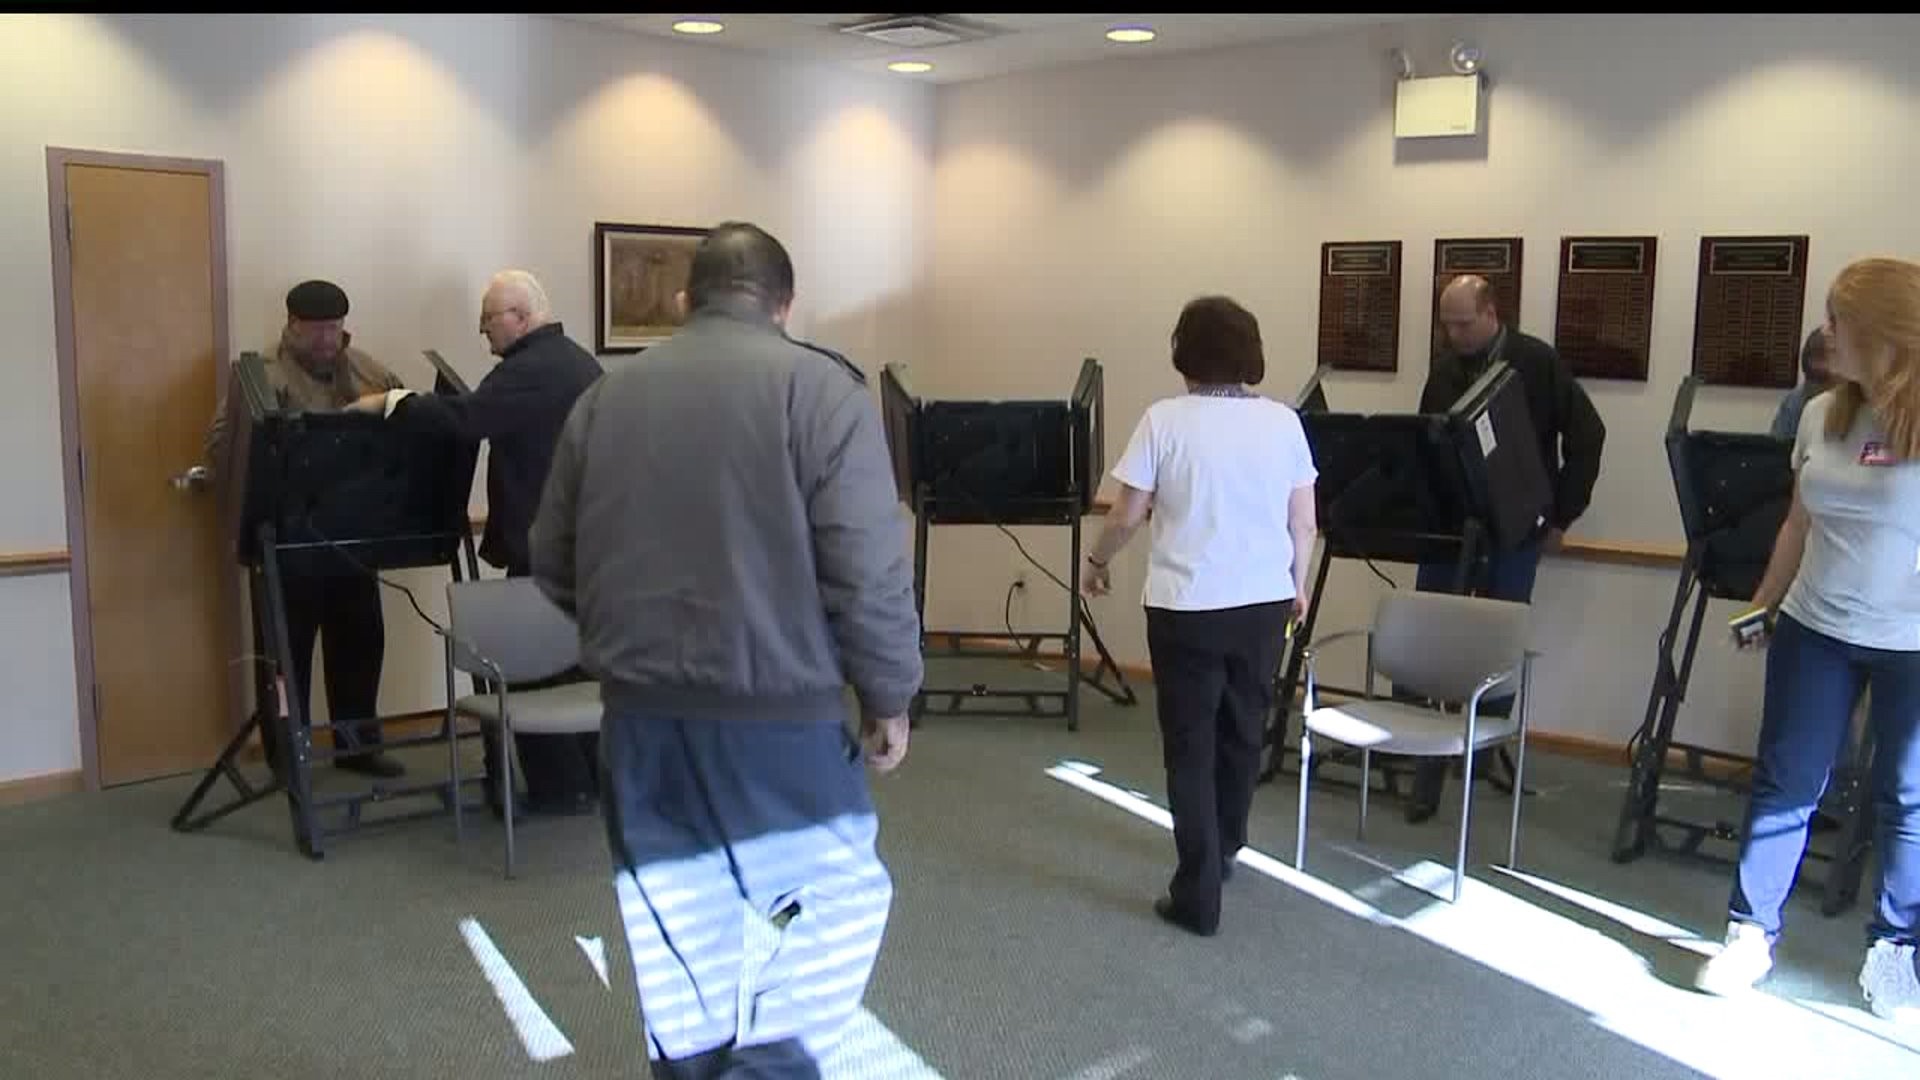 Voters in the area get ready to take to the polls